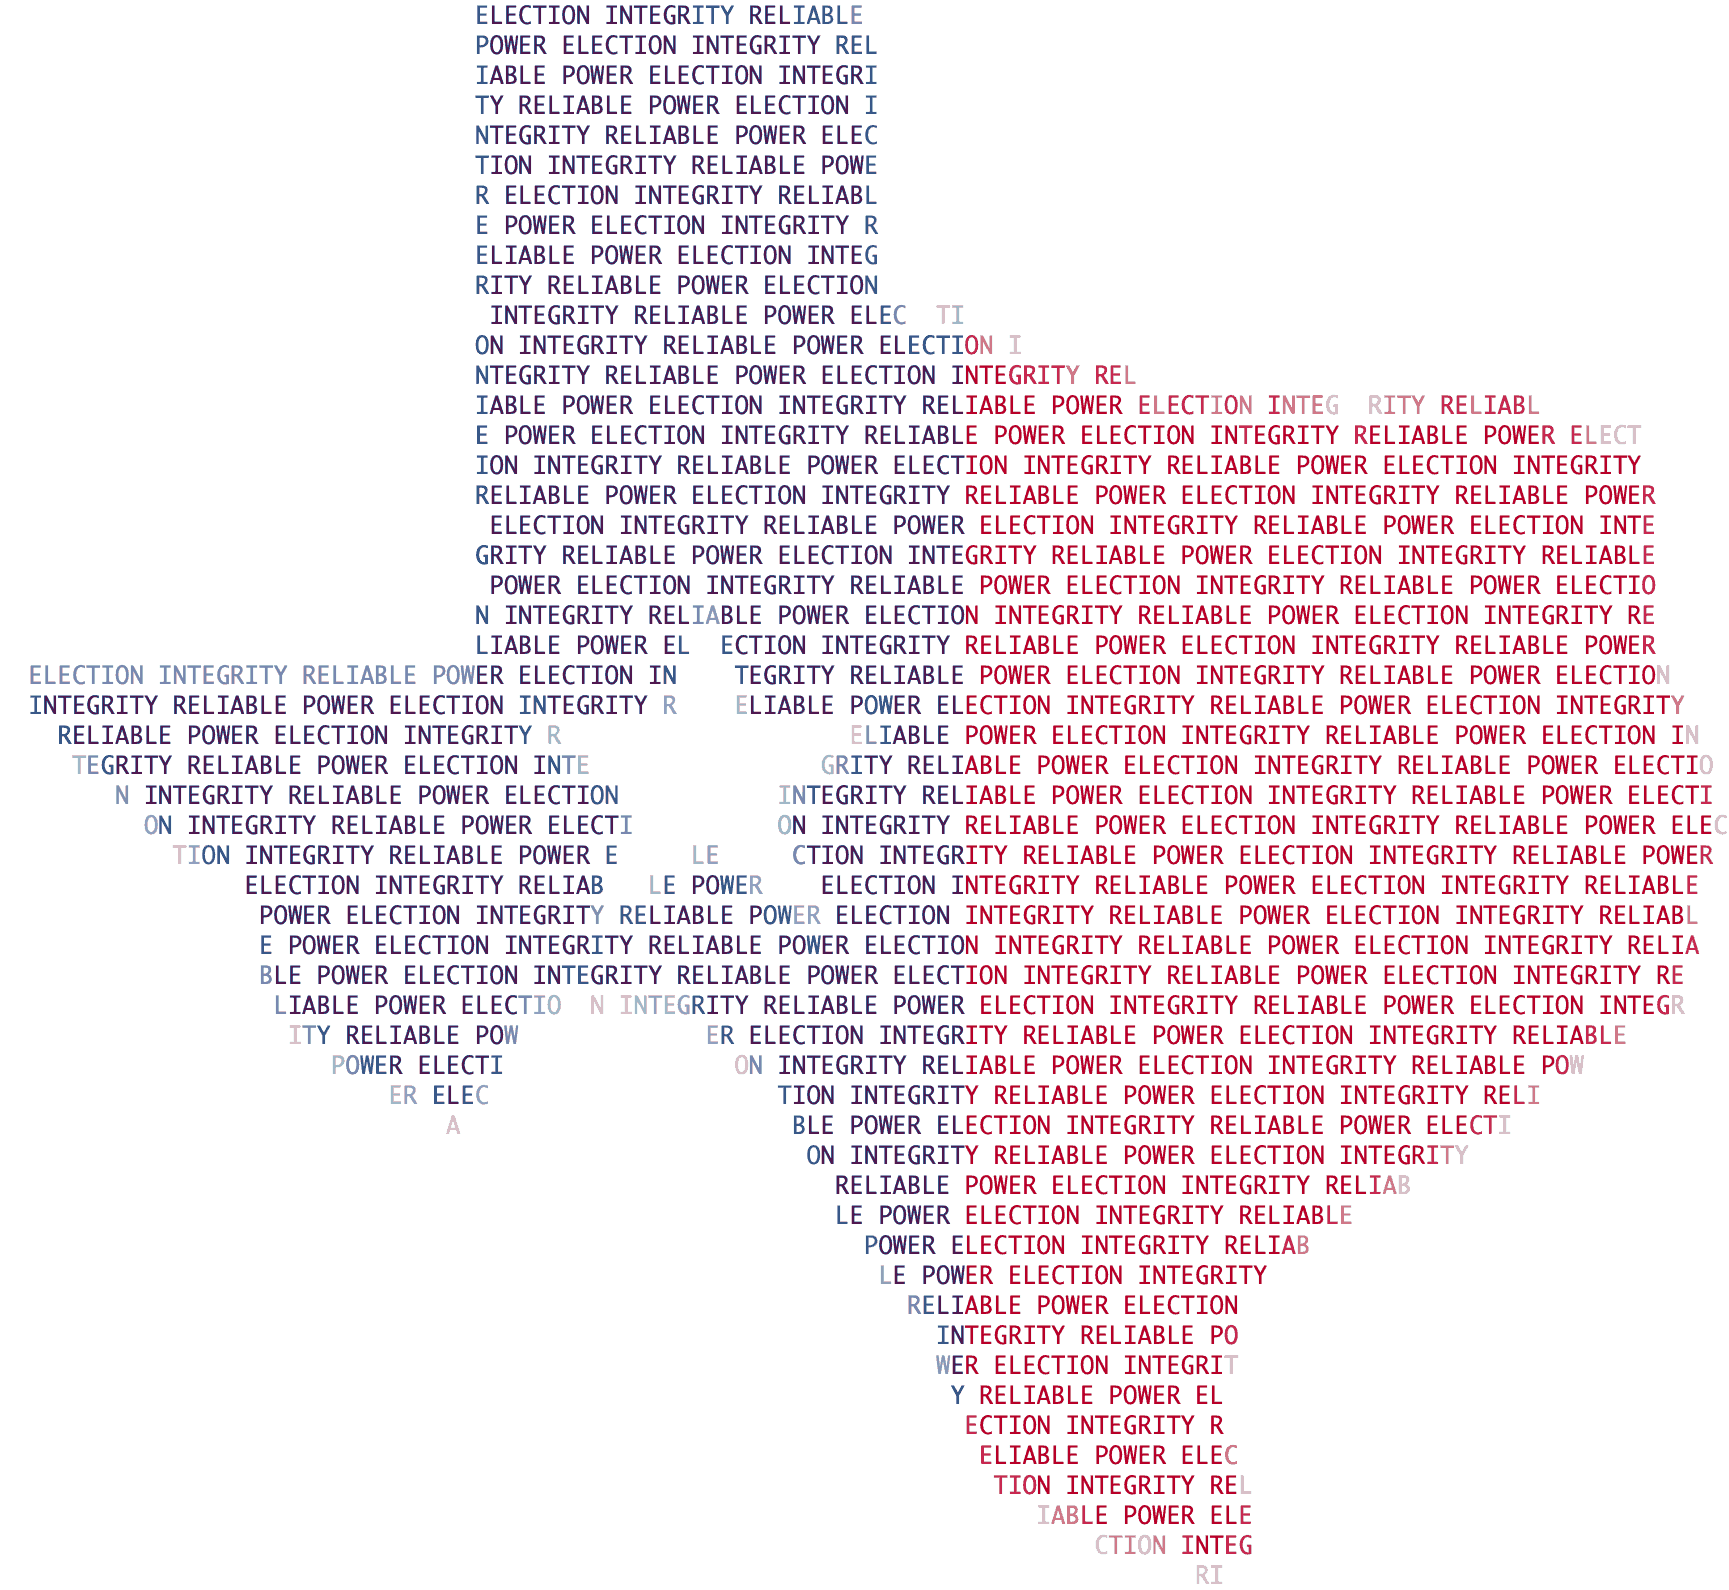 Texas Elections and Power